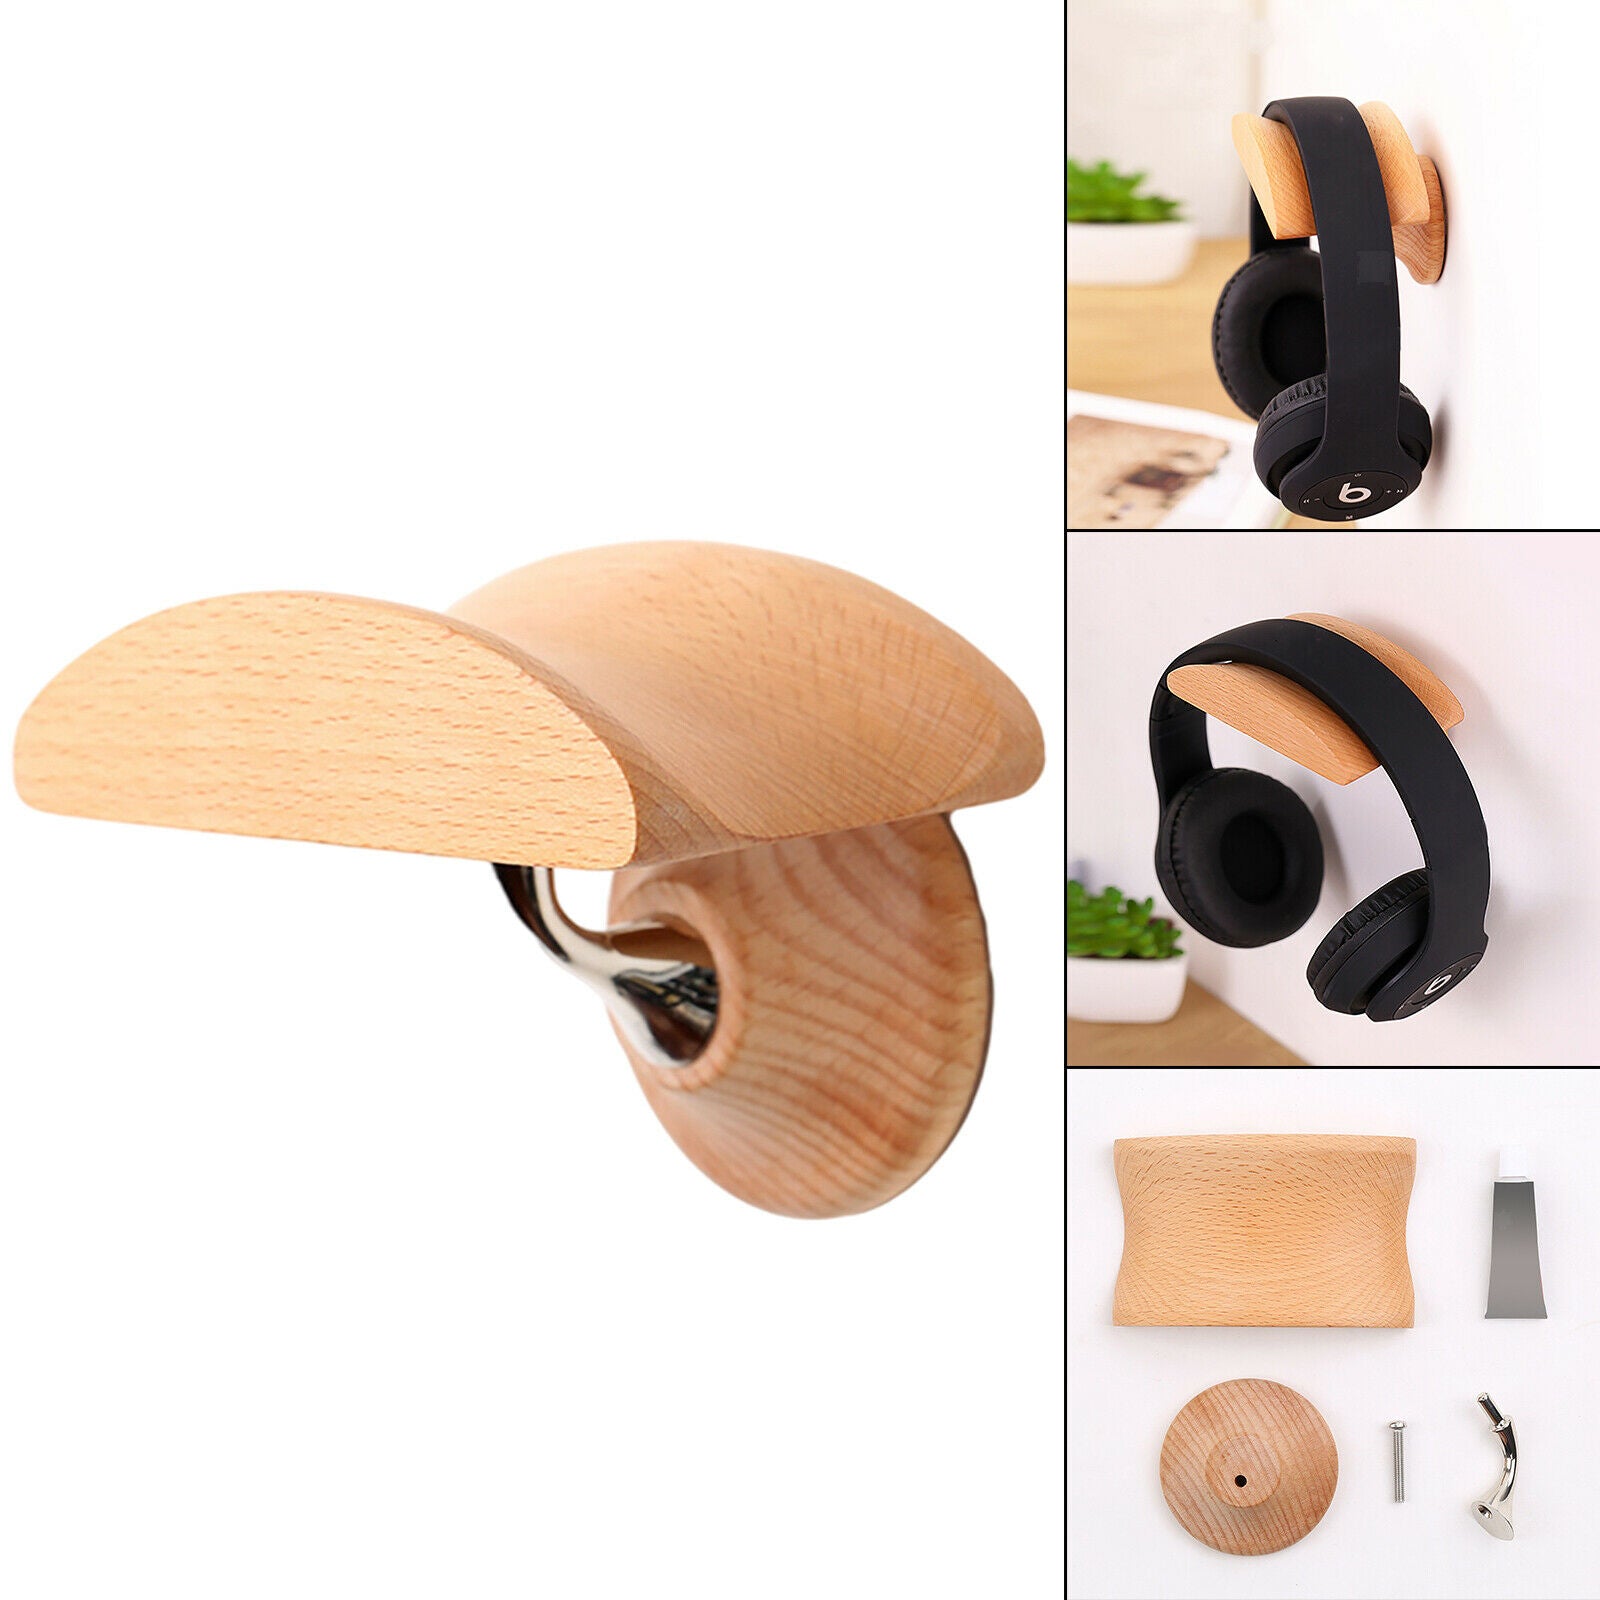 PC Gaming Headset Holder Wooden headset holder to organize the